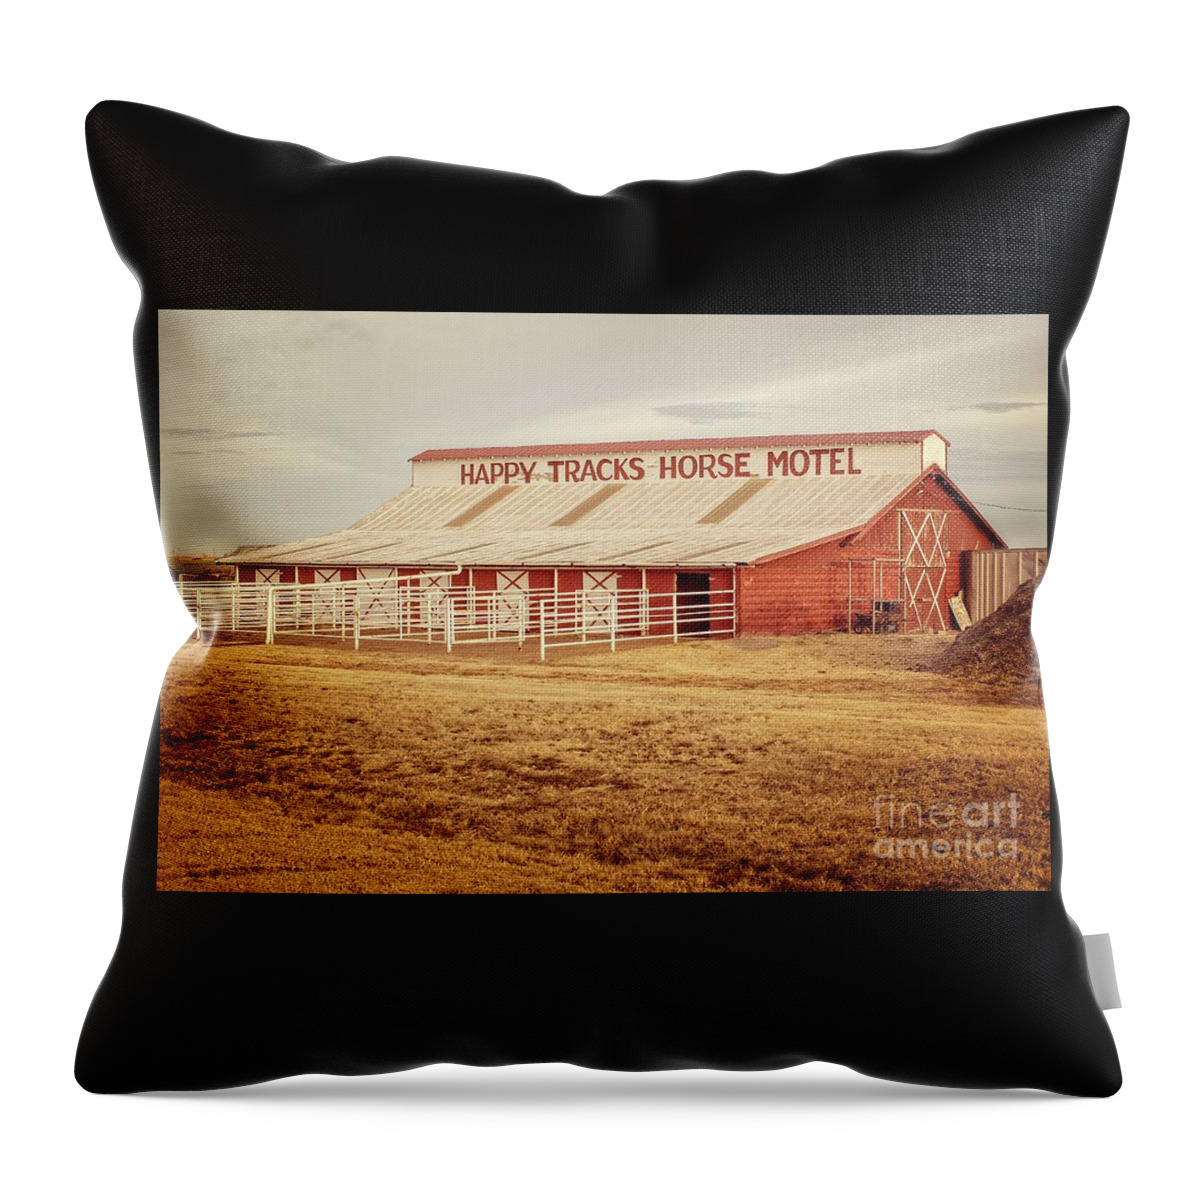 Happy Tracks Horse Motel Throw Pillow featuring the photograph Happy Tracks Horse Motel by Imagery by Charly